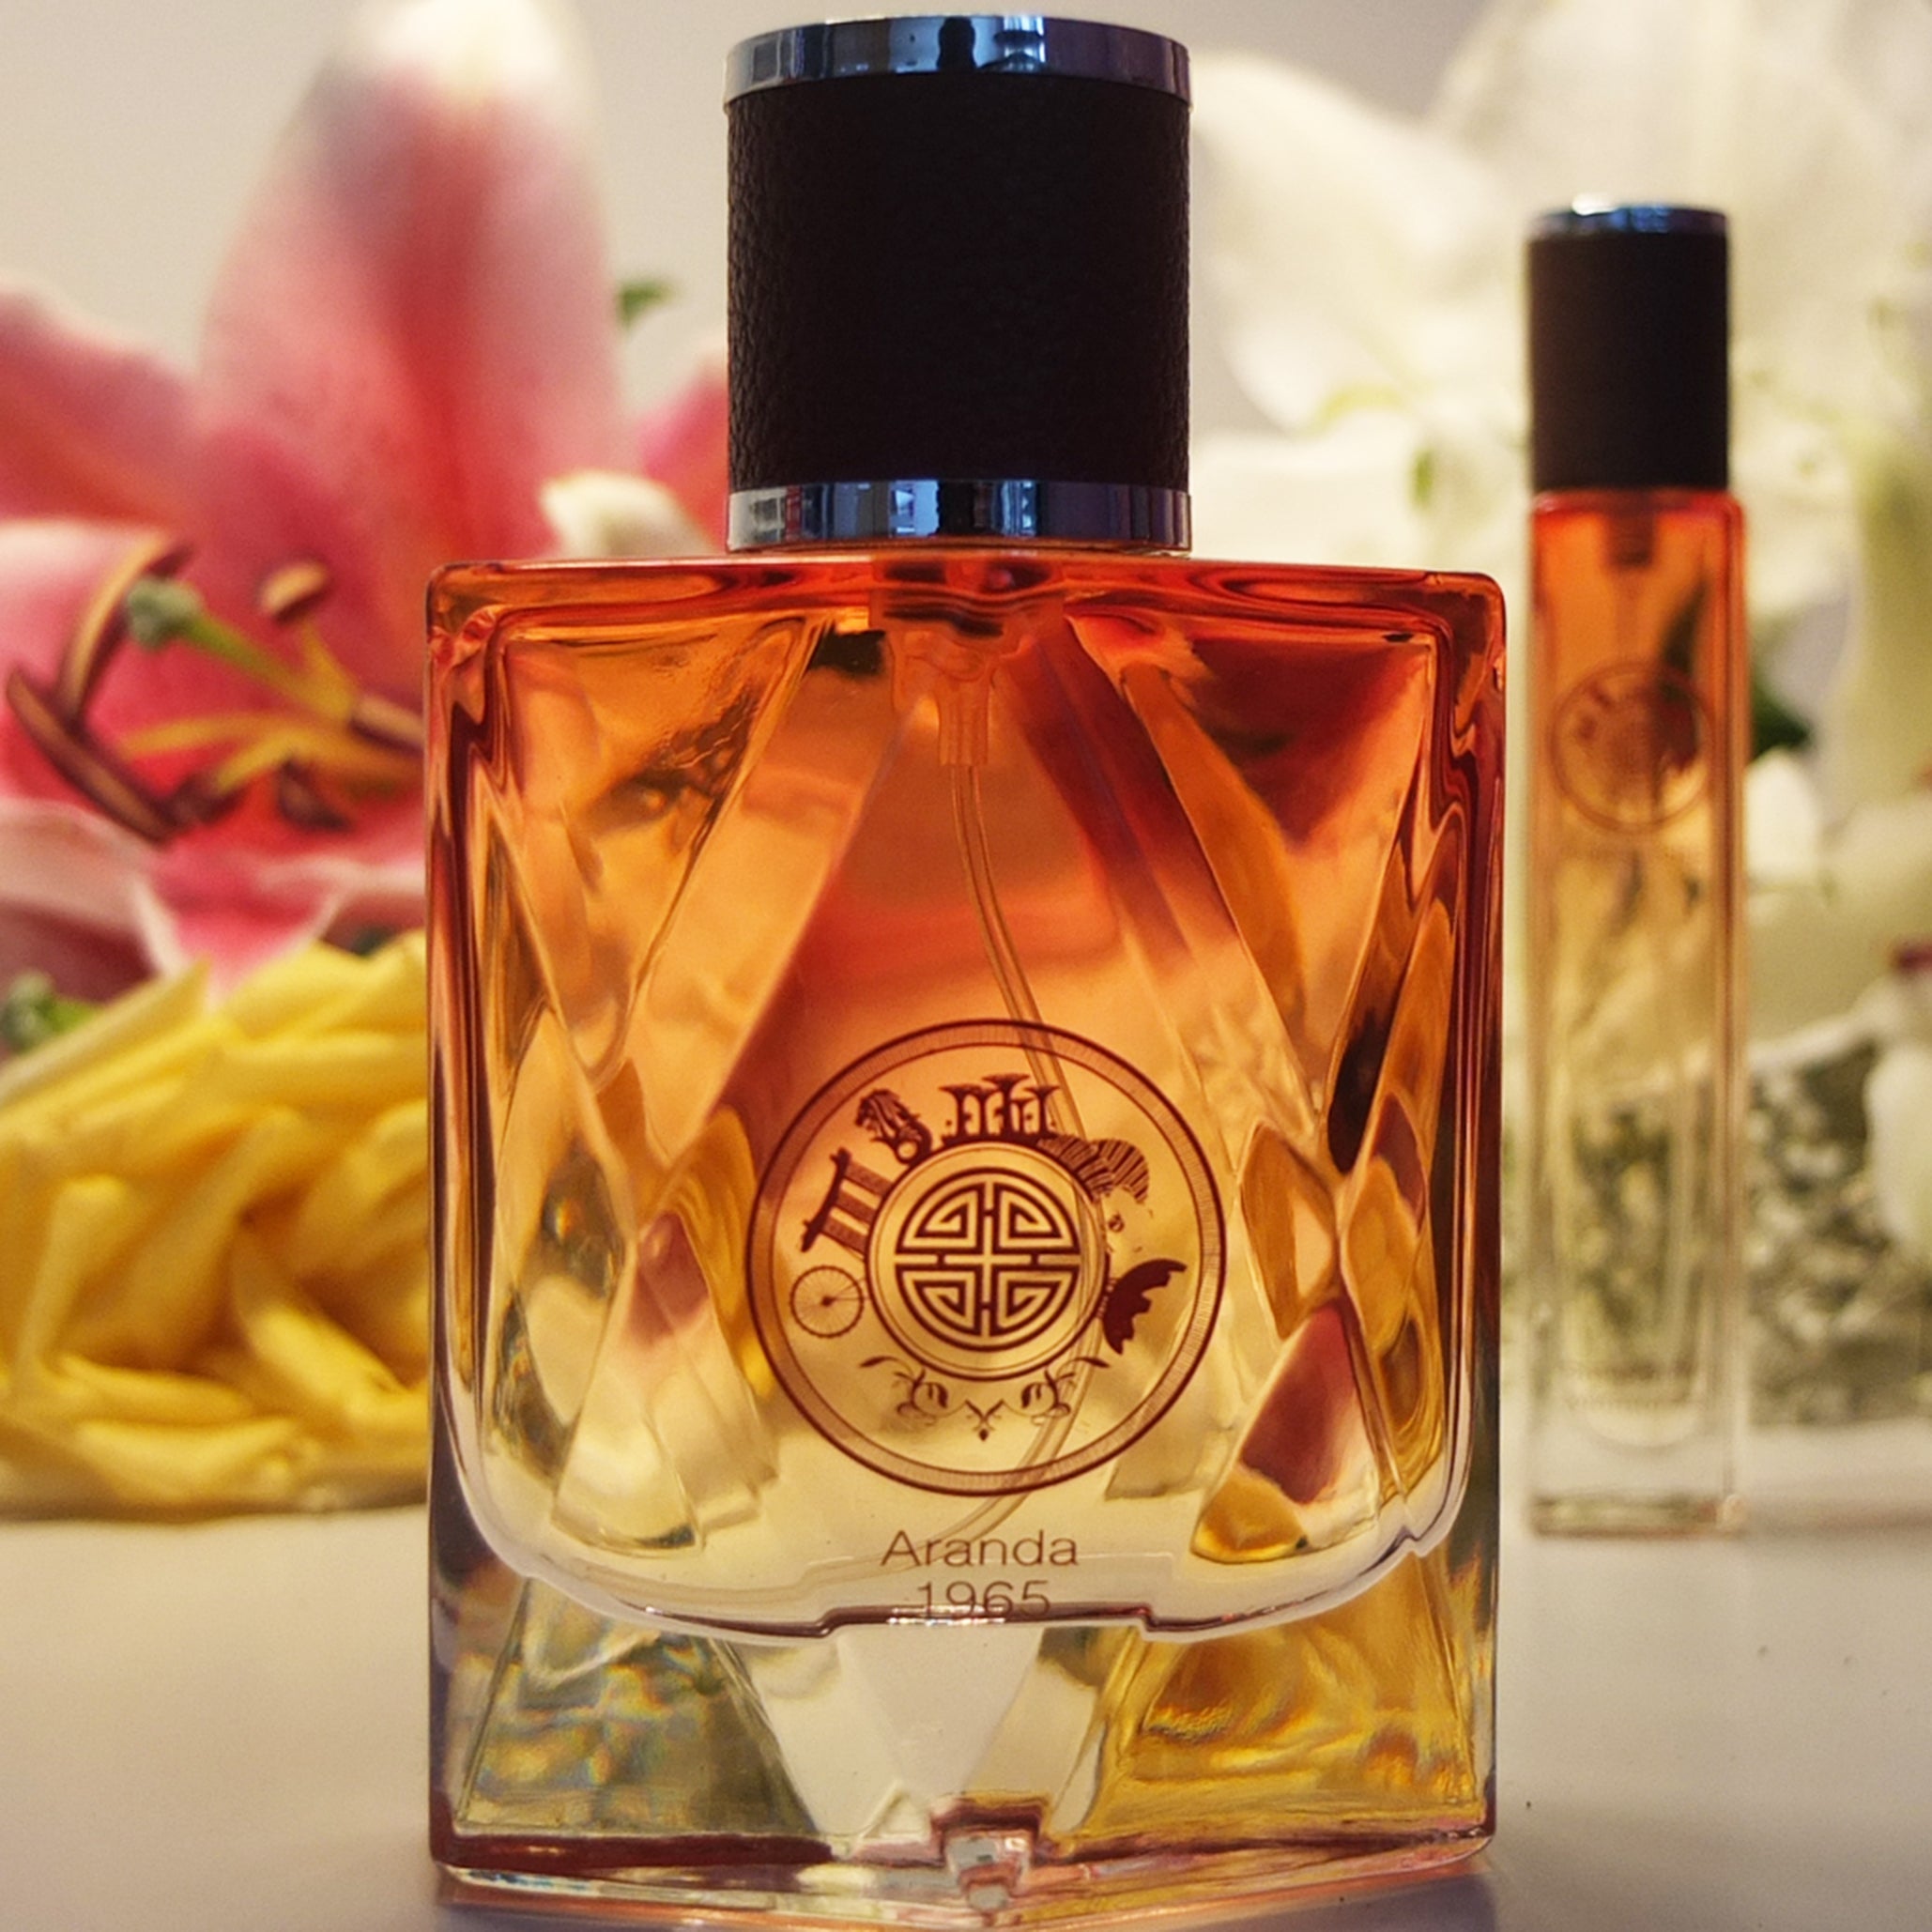 Singapore online perfume : Singapore Memories, Aranda 1965 a great Orchid Perfume and a perfect souvenir from singapore for your expat friends and family